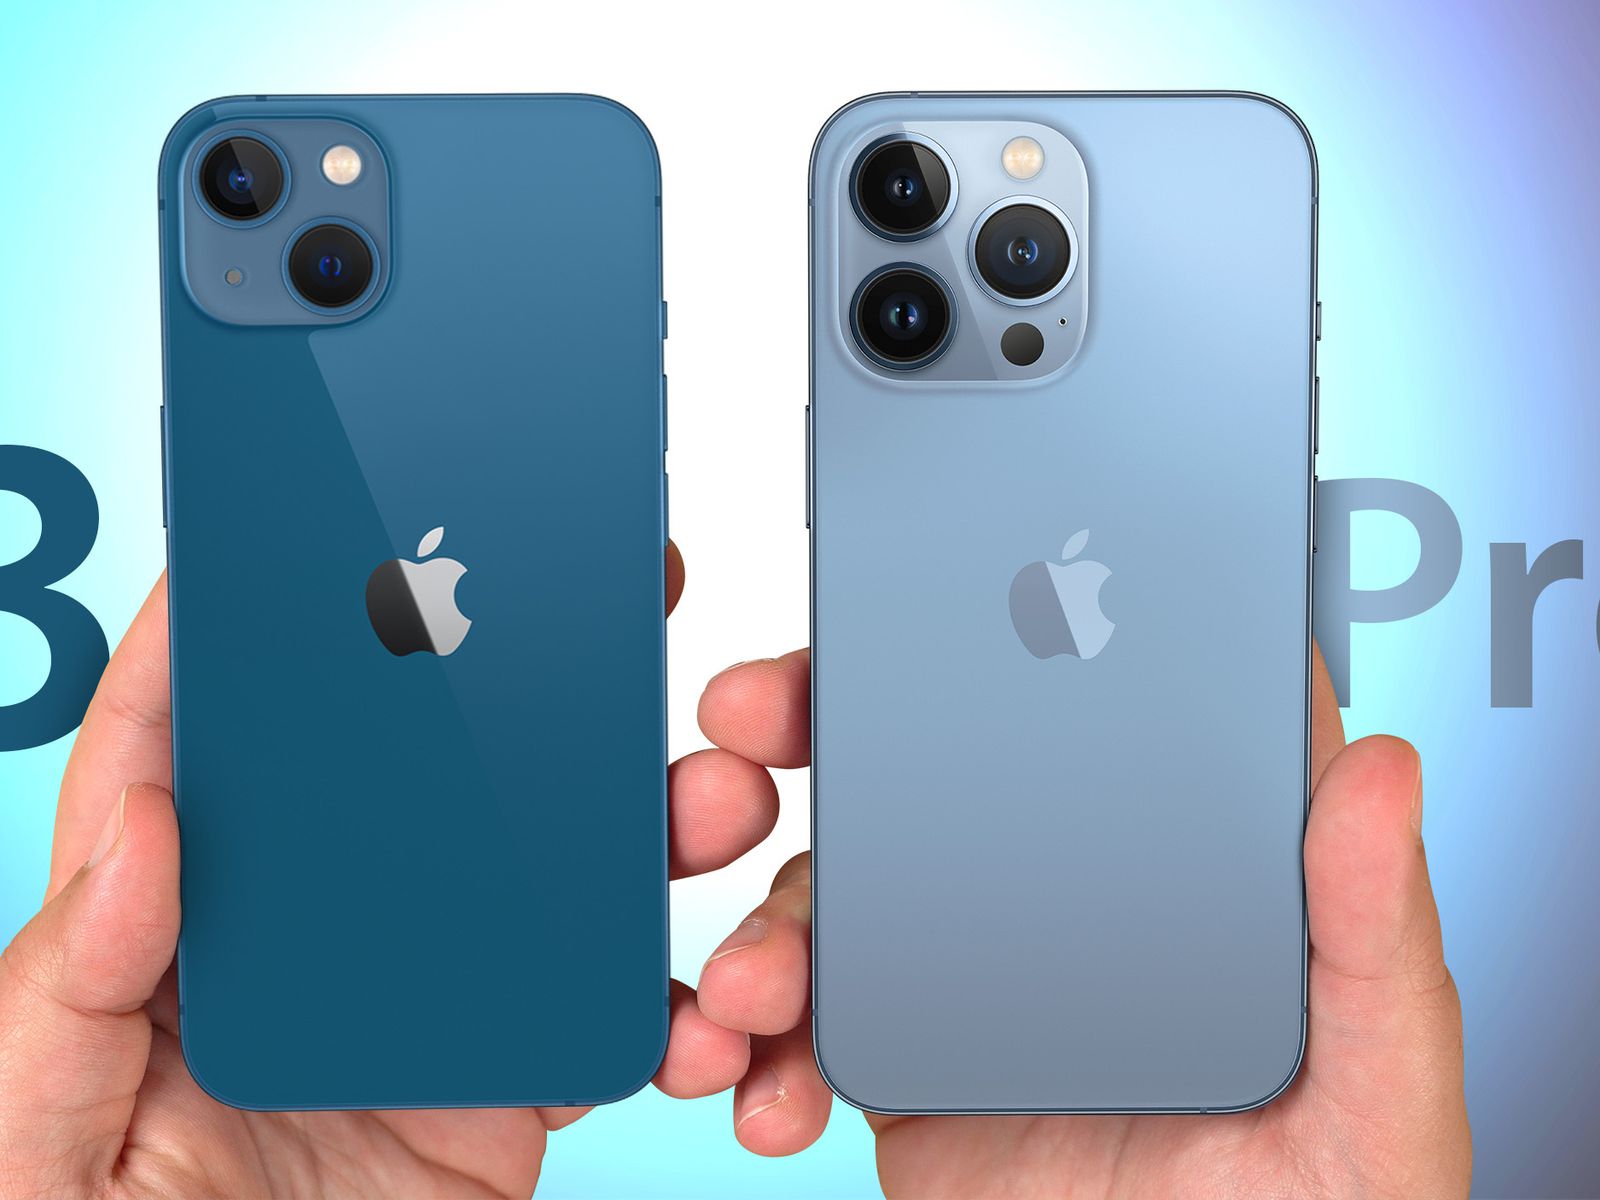 iPhone 13 Color Options: Which Should You Choose? - MacRumors